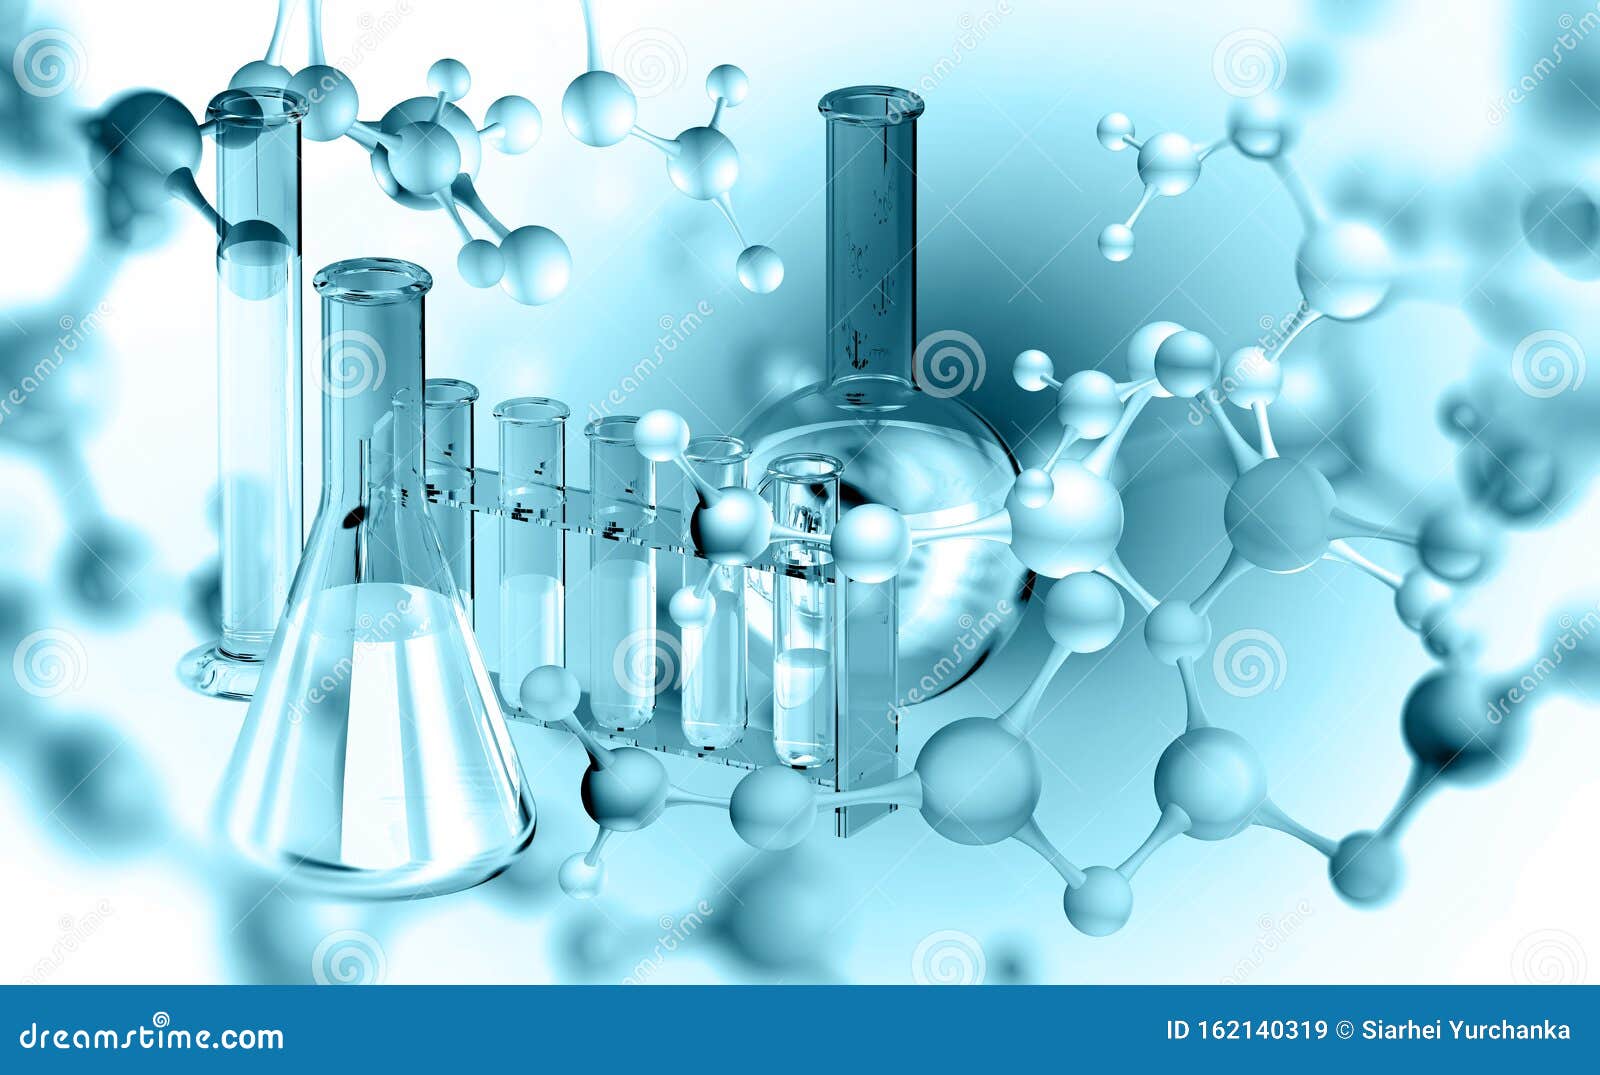 chemical laboratory and innovations in medicine